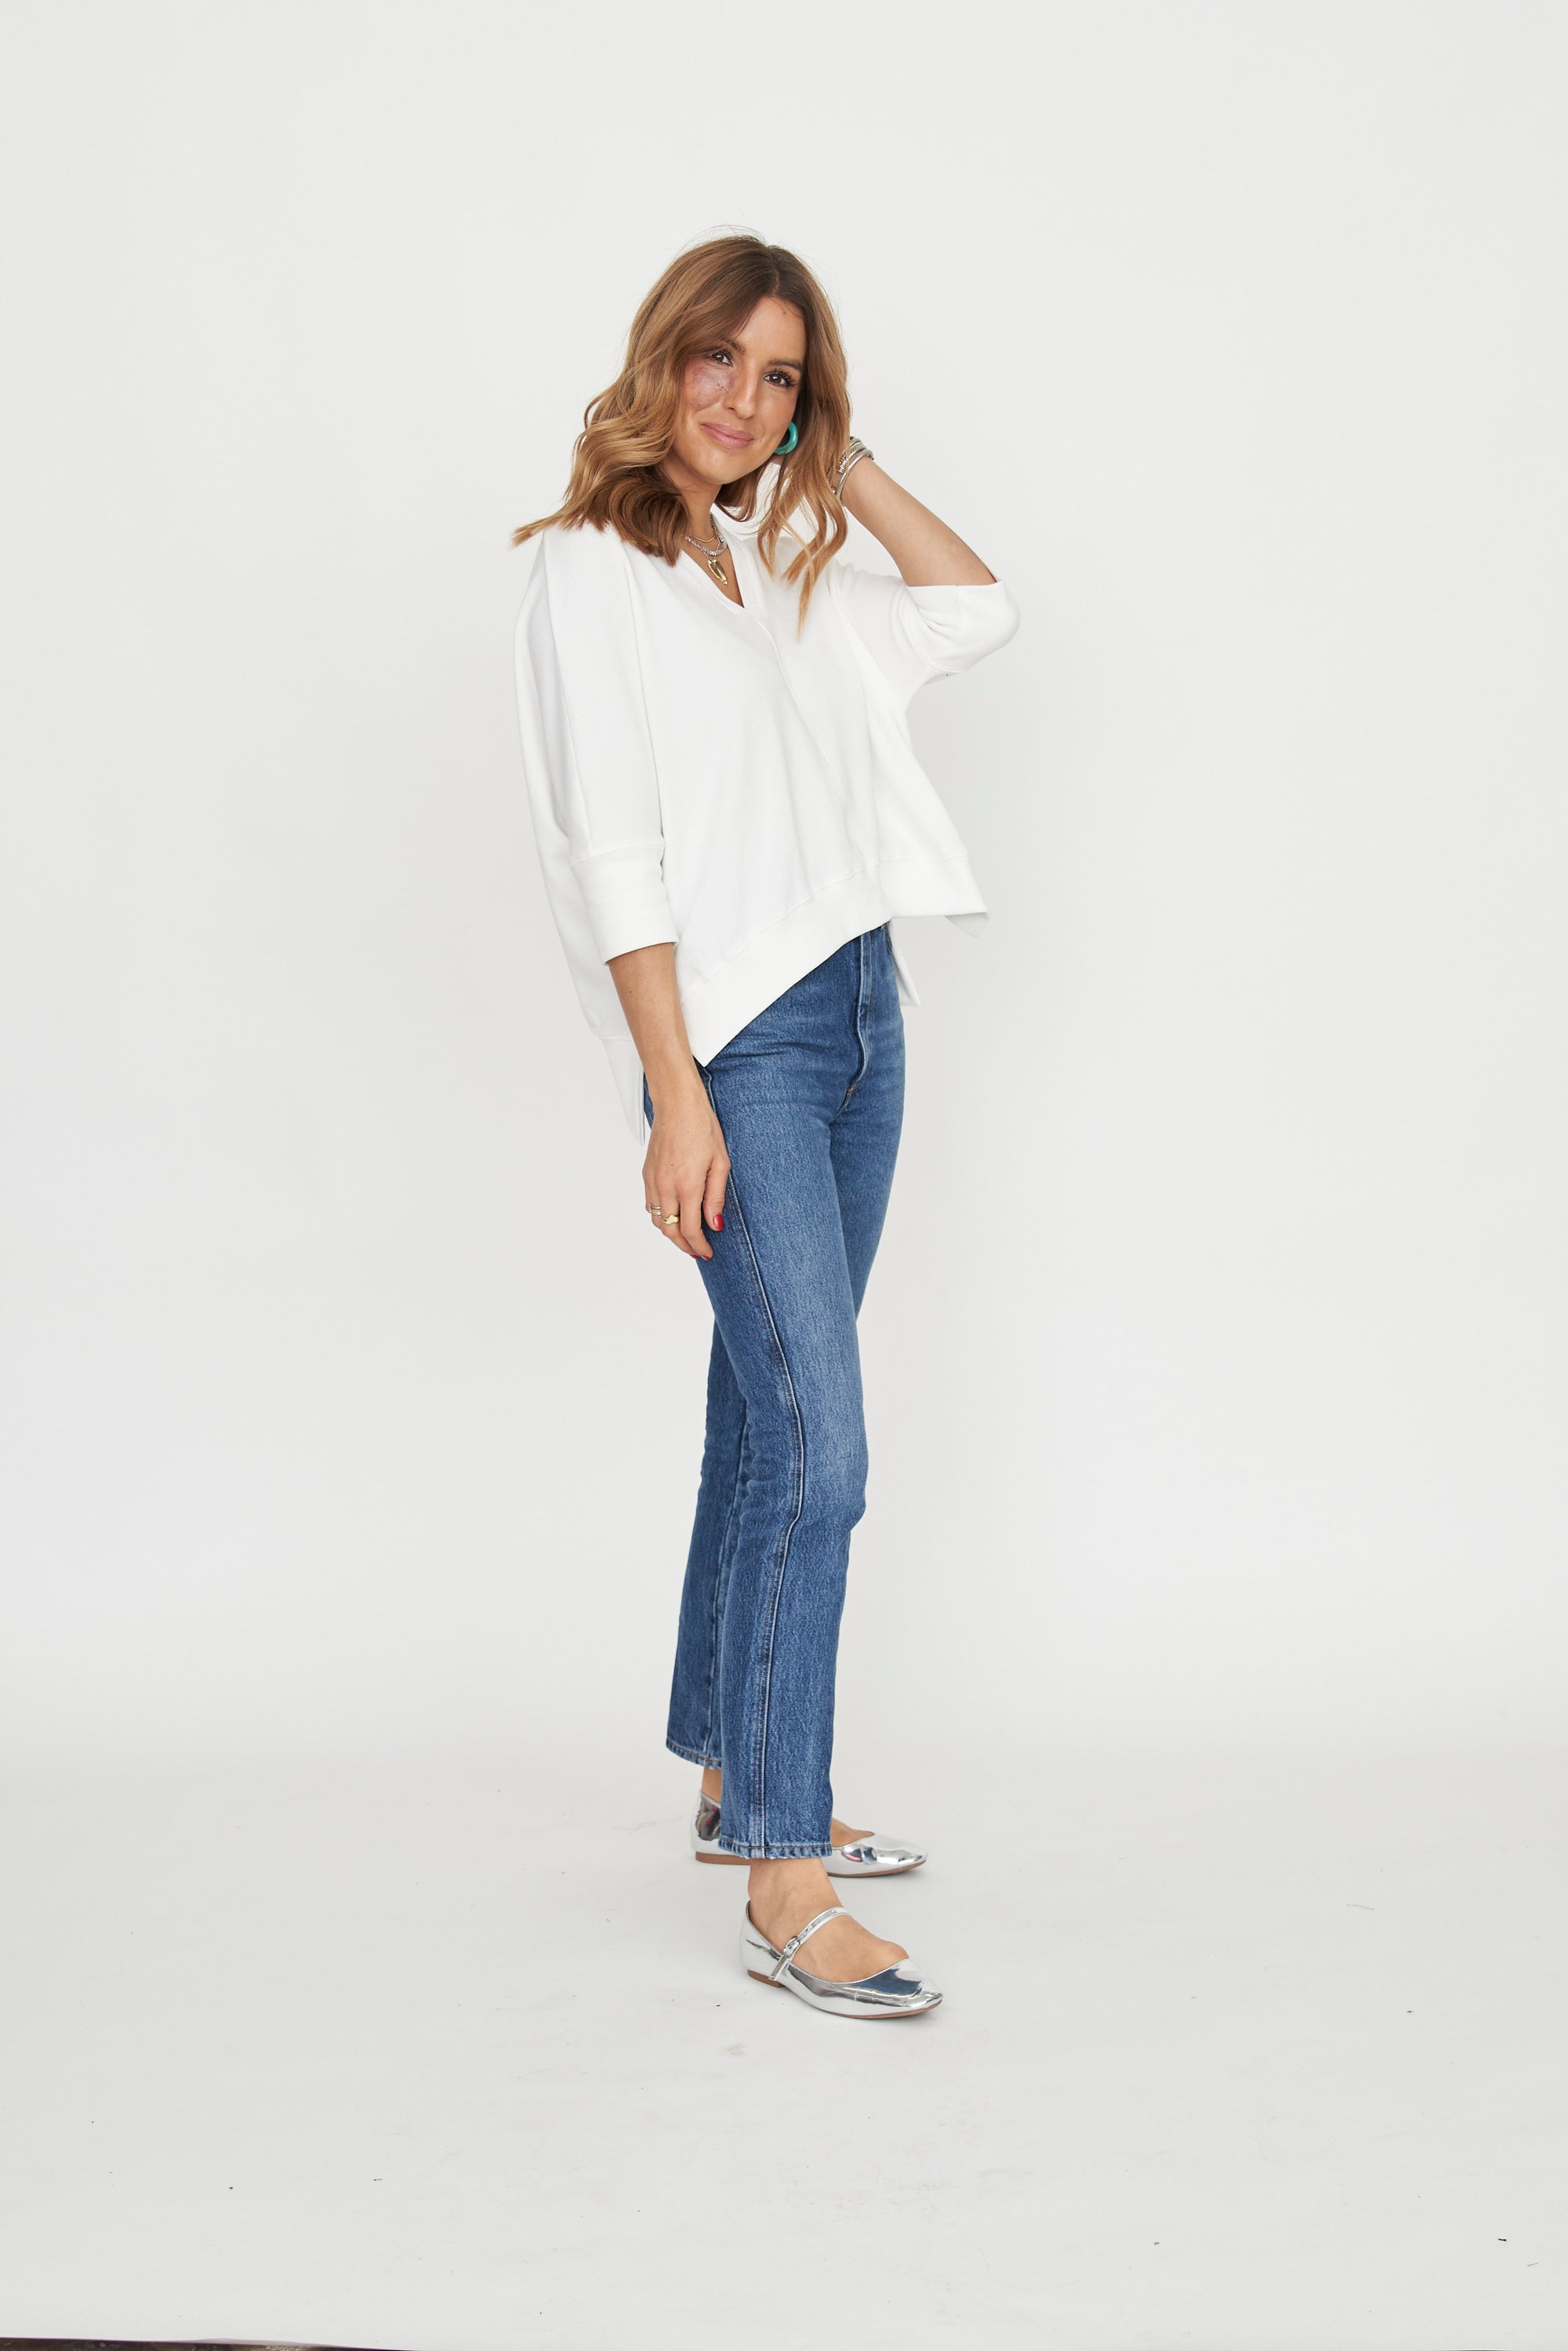 Rory Vneck Top